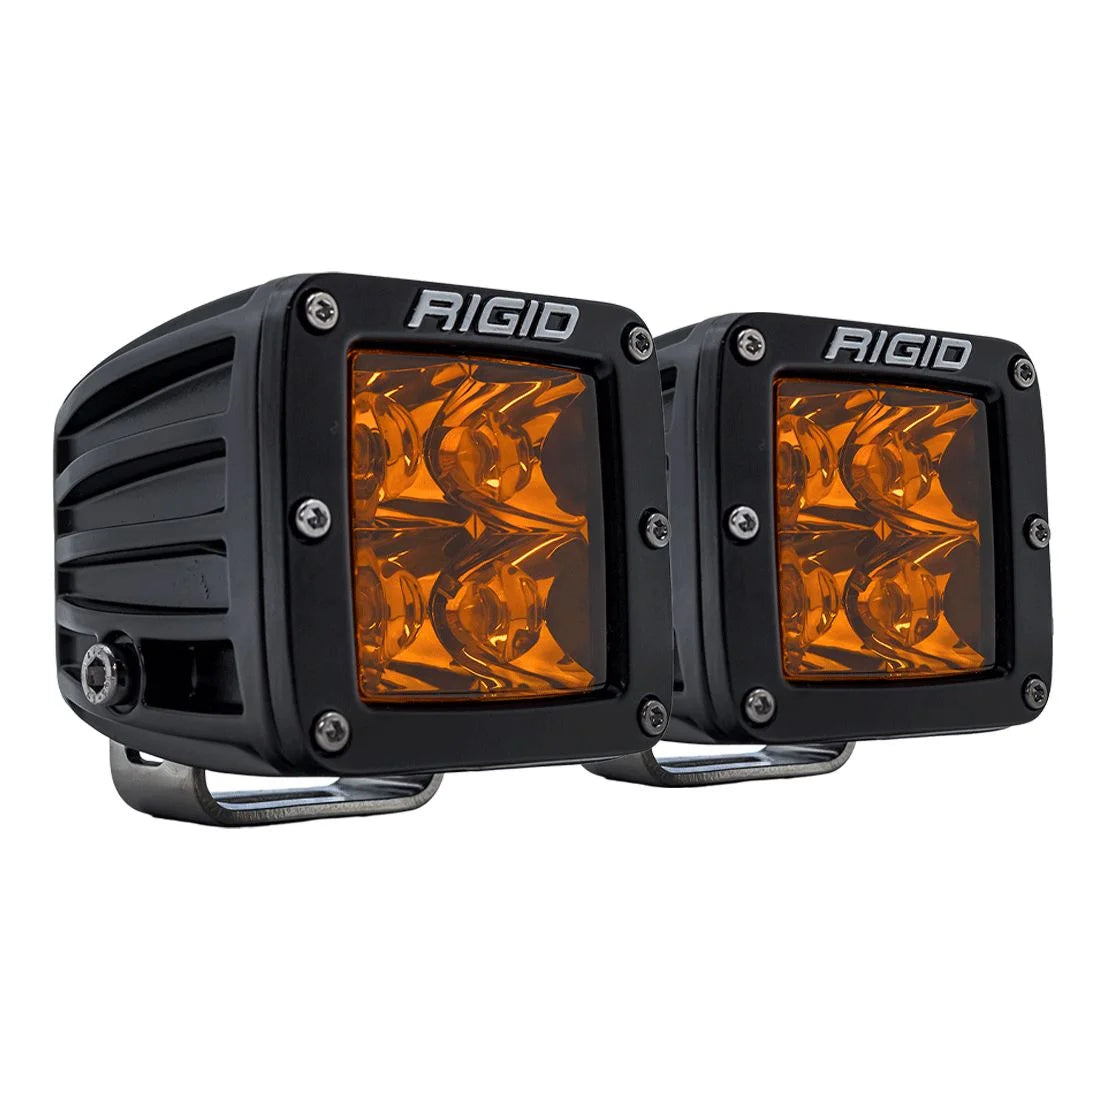 Rigid D-Series AMBER PRO SPOT Light Pods (SOLD IN PAIRS)